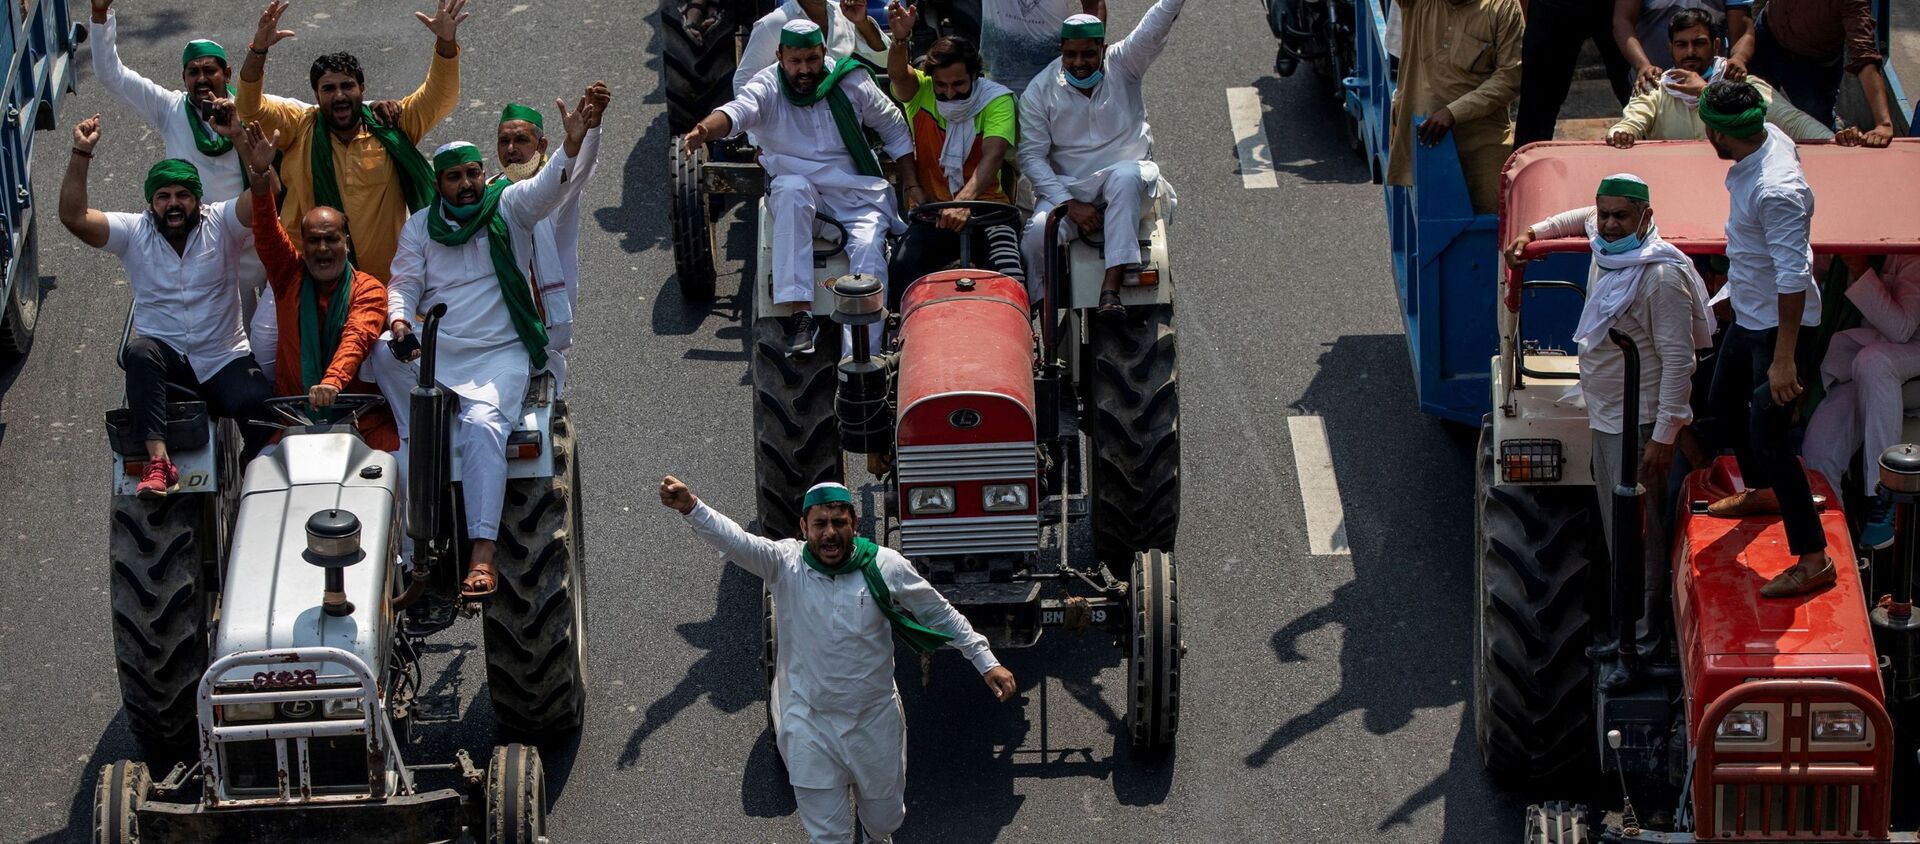 Farmers on tractors shout slogans as they arrive to block the Delhi-Uttar Pradesh border during a protest against farm bills passed by India's parliament - Sputnik International, 1920, 04.10.2020